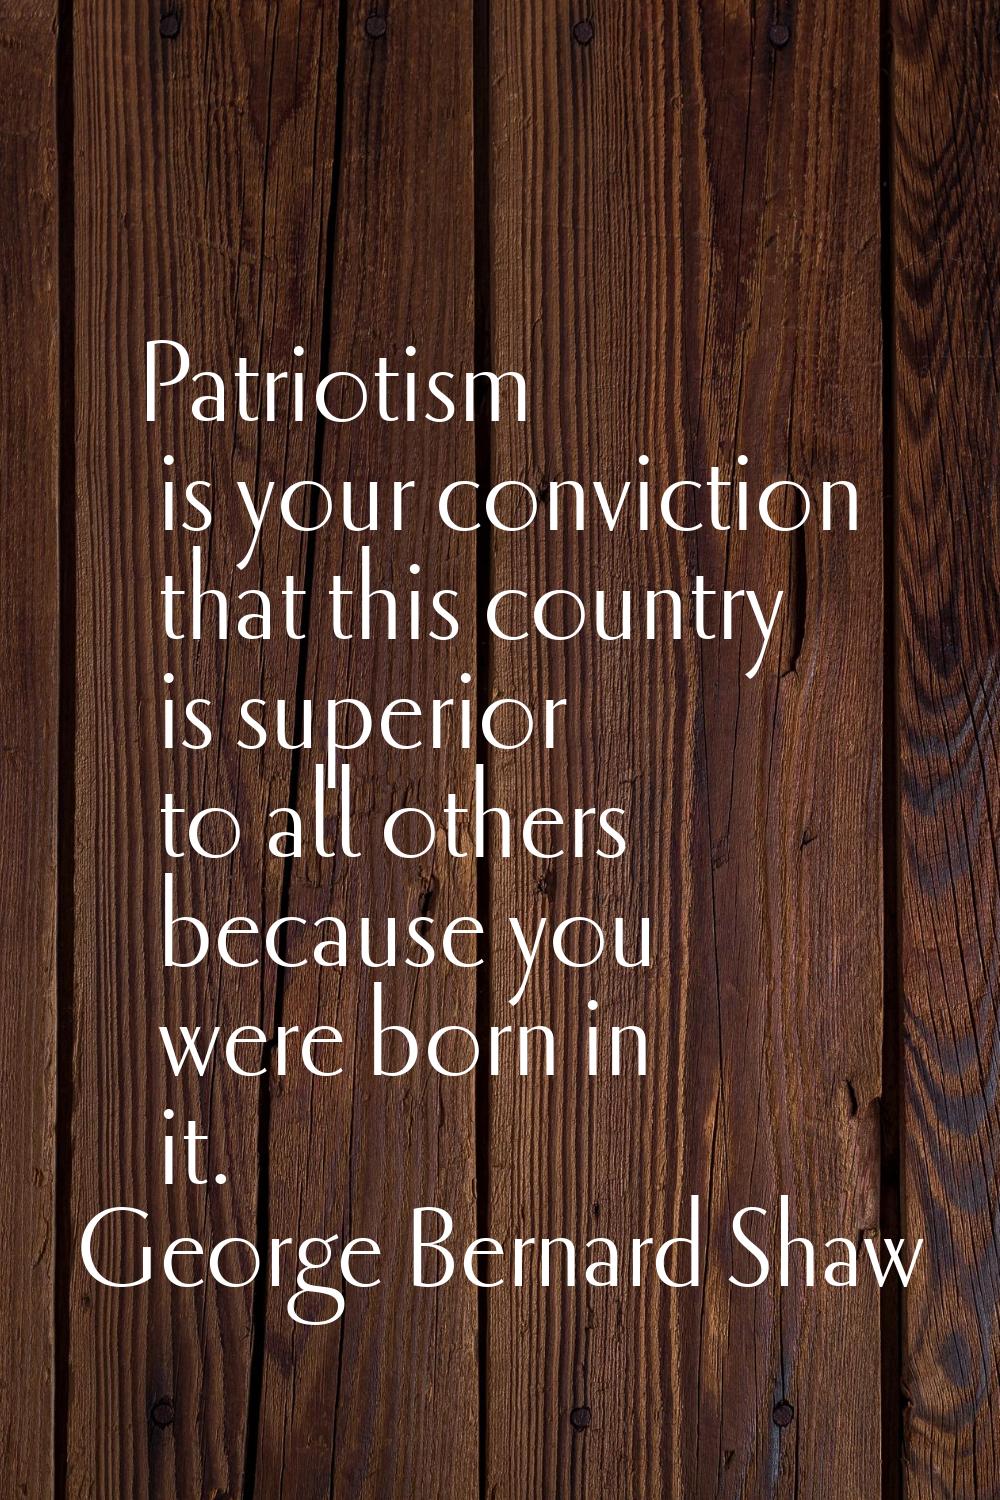 Patriotism is your conviction that this country is superior to all others because you were born in 